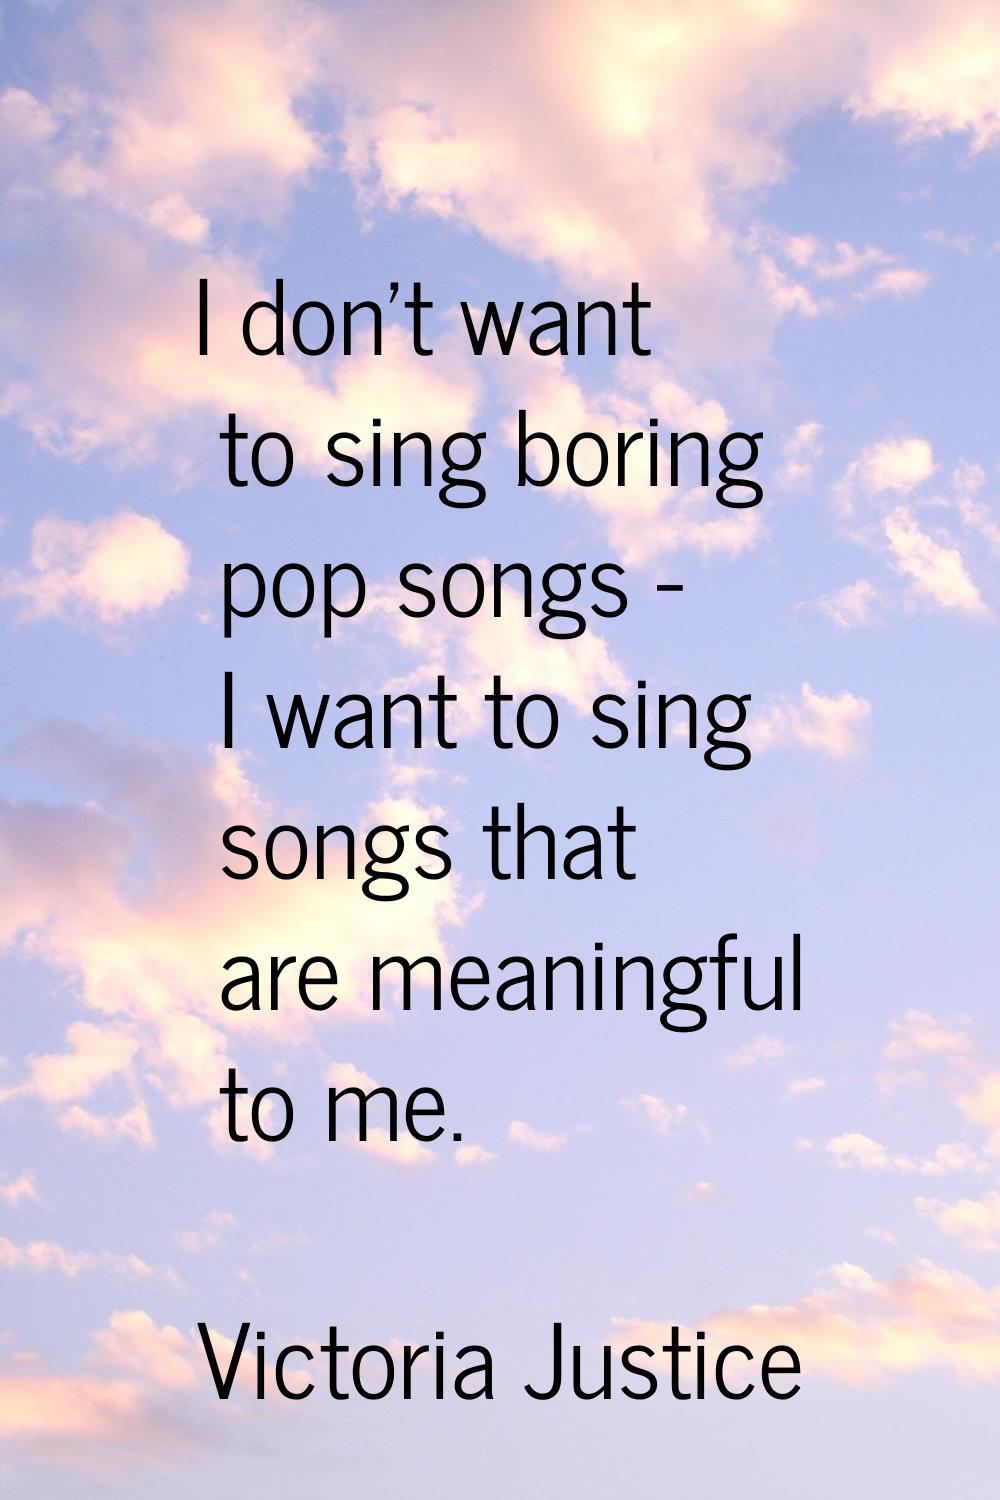 I don't want to sing boring pop songs - I want to sing songs that are meaningful to me.